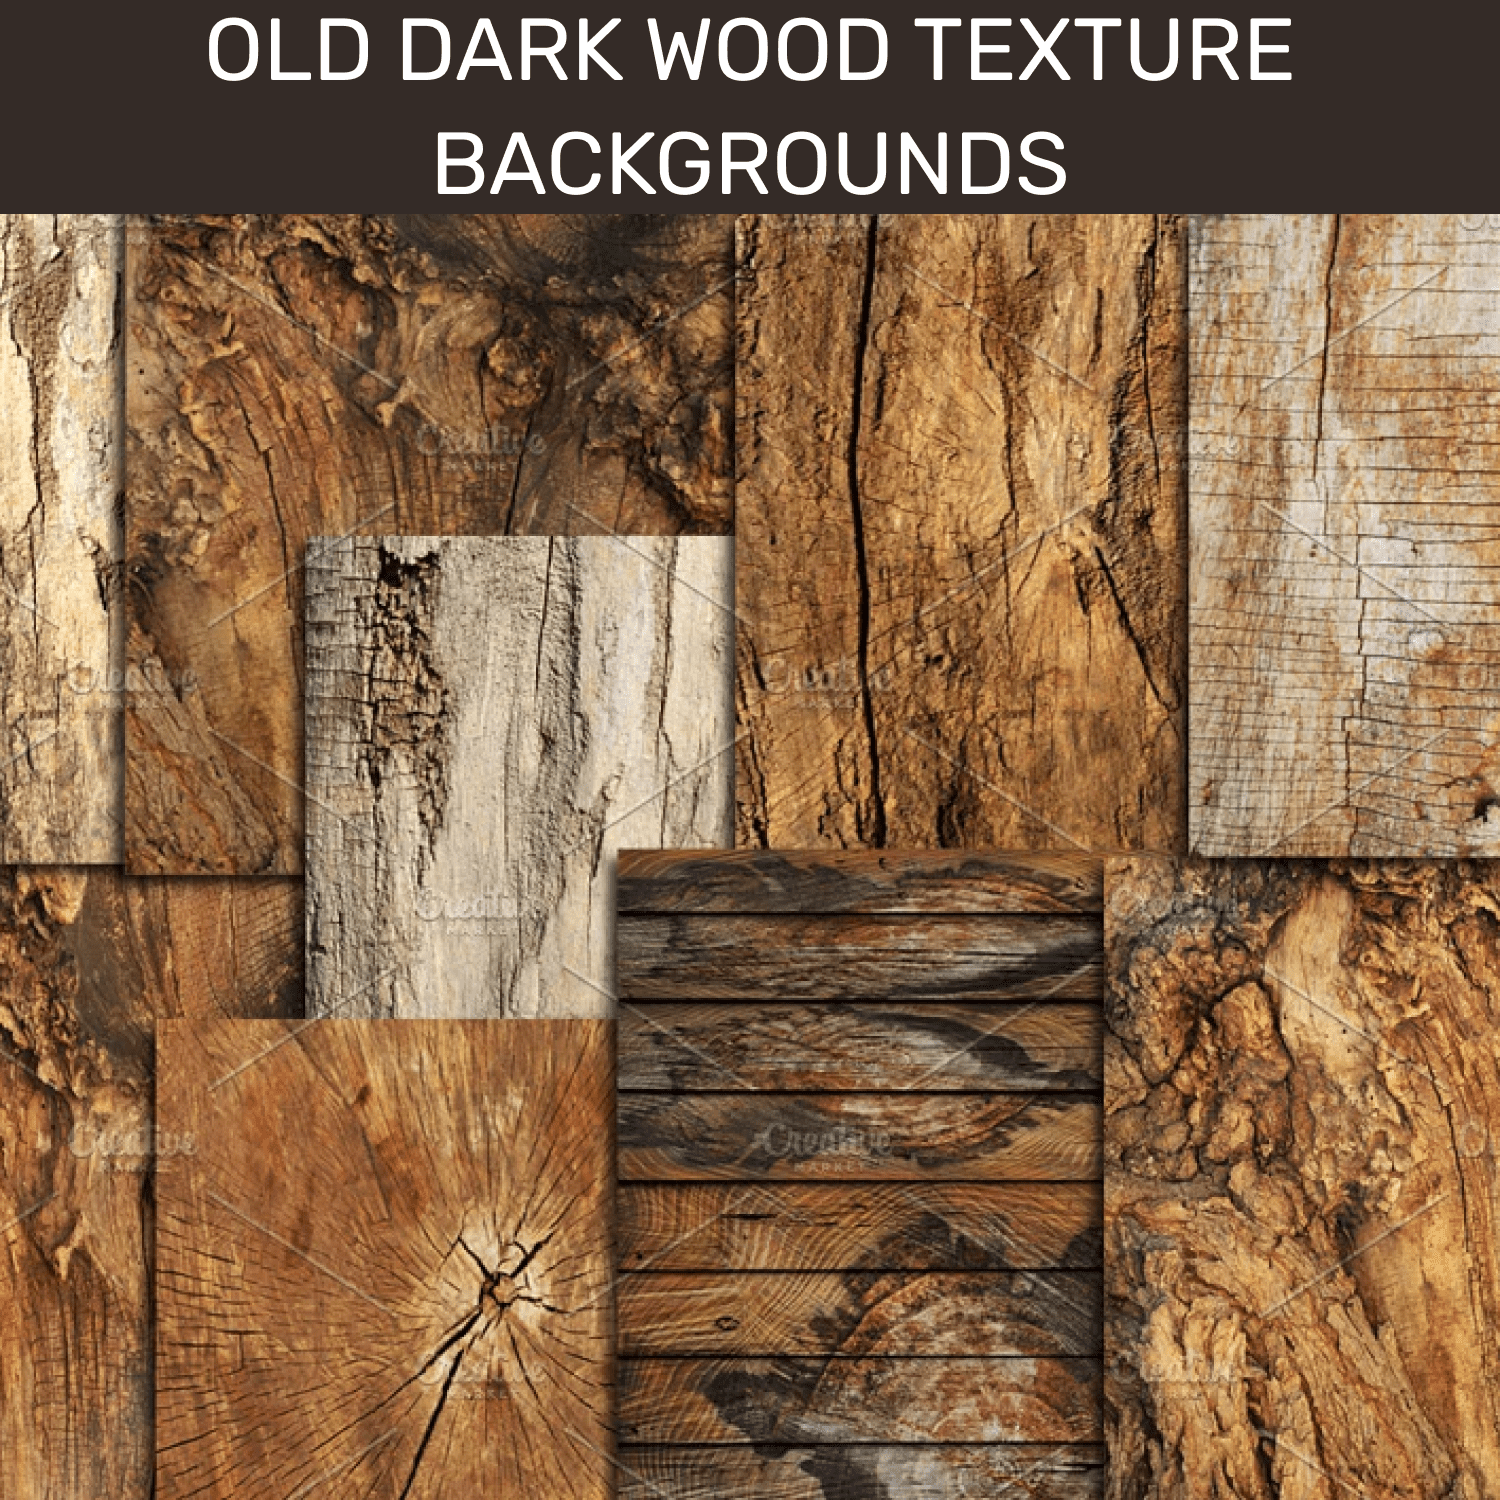 01 old dark wood texture backgrounds 1500x1500 1